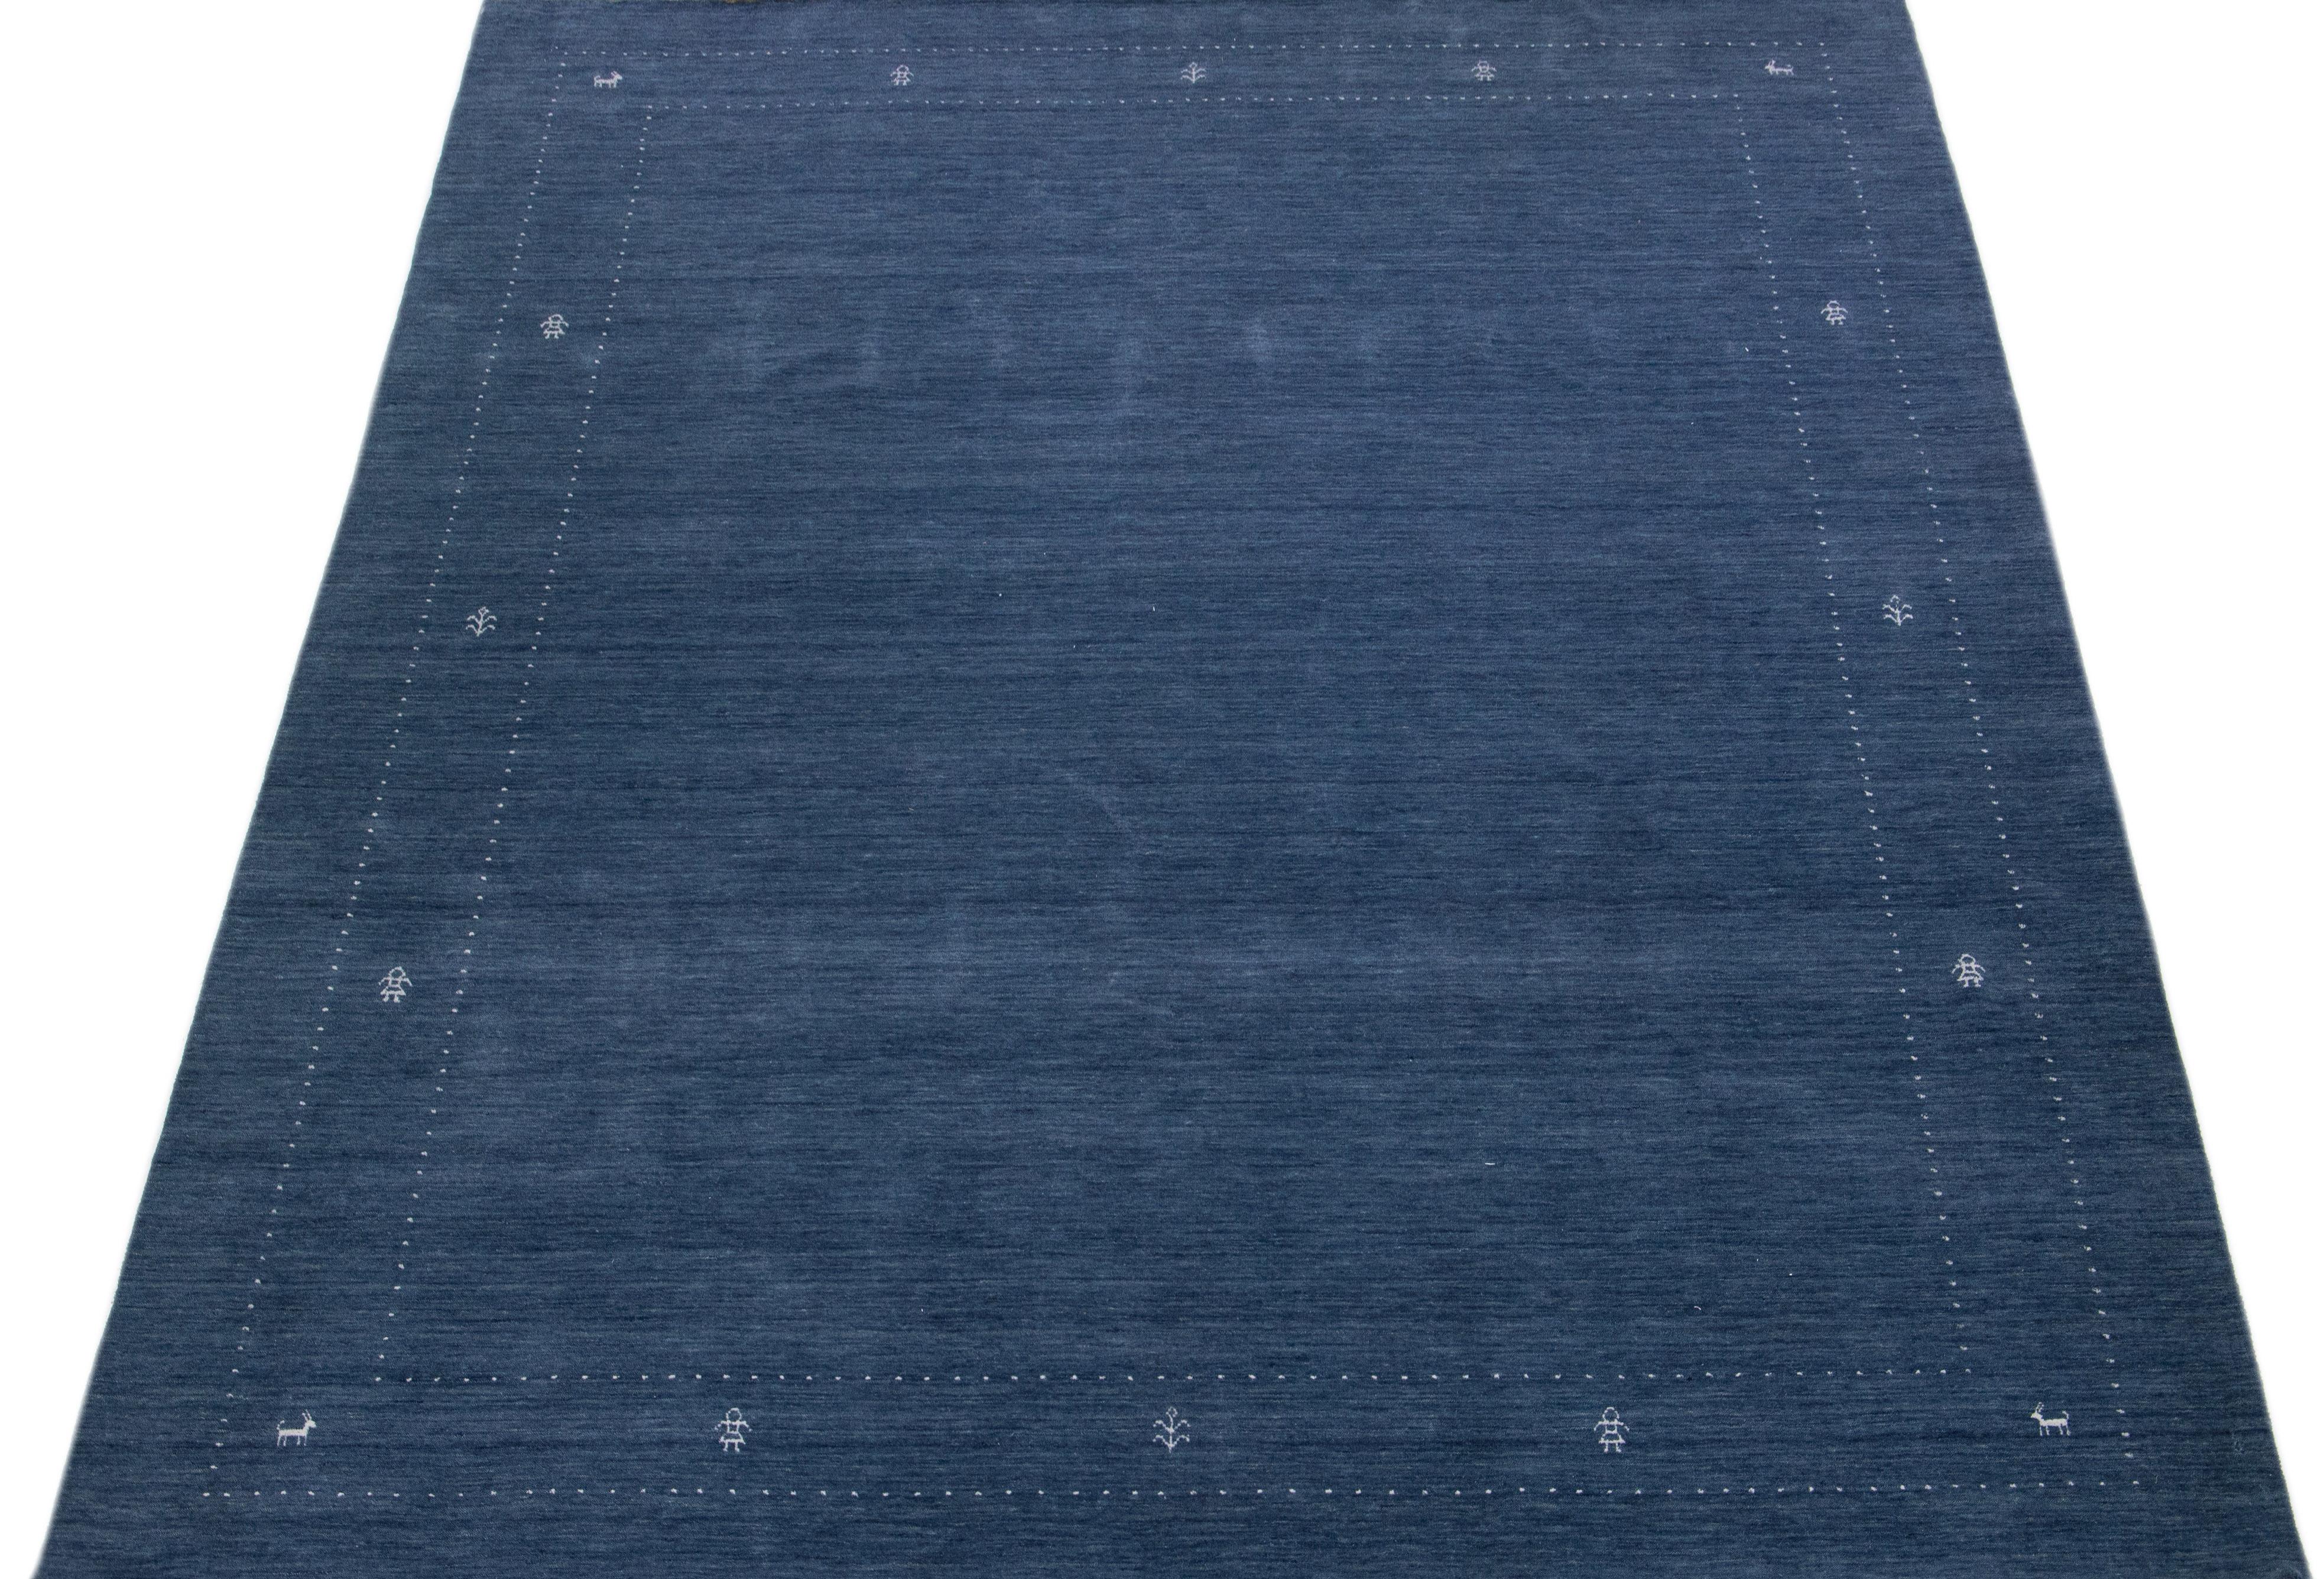 A stunning modern Gabbeh-style hand-woven wool rug boasting a blue color field and exquisite white minimalist design. 

This rug measures: 9'1